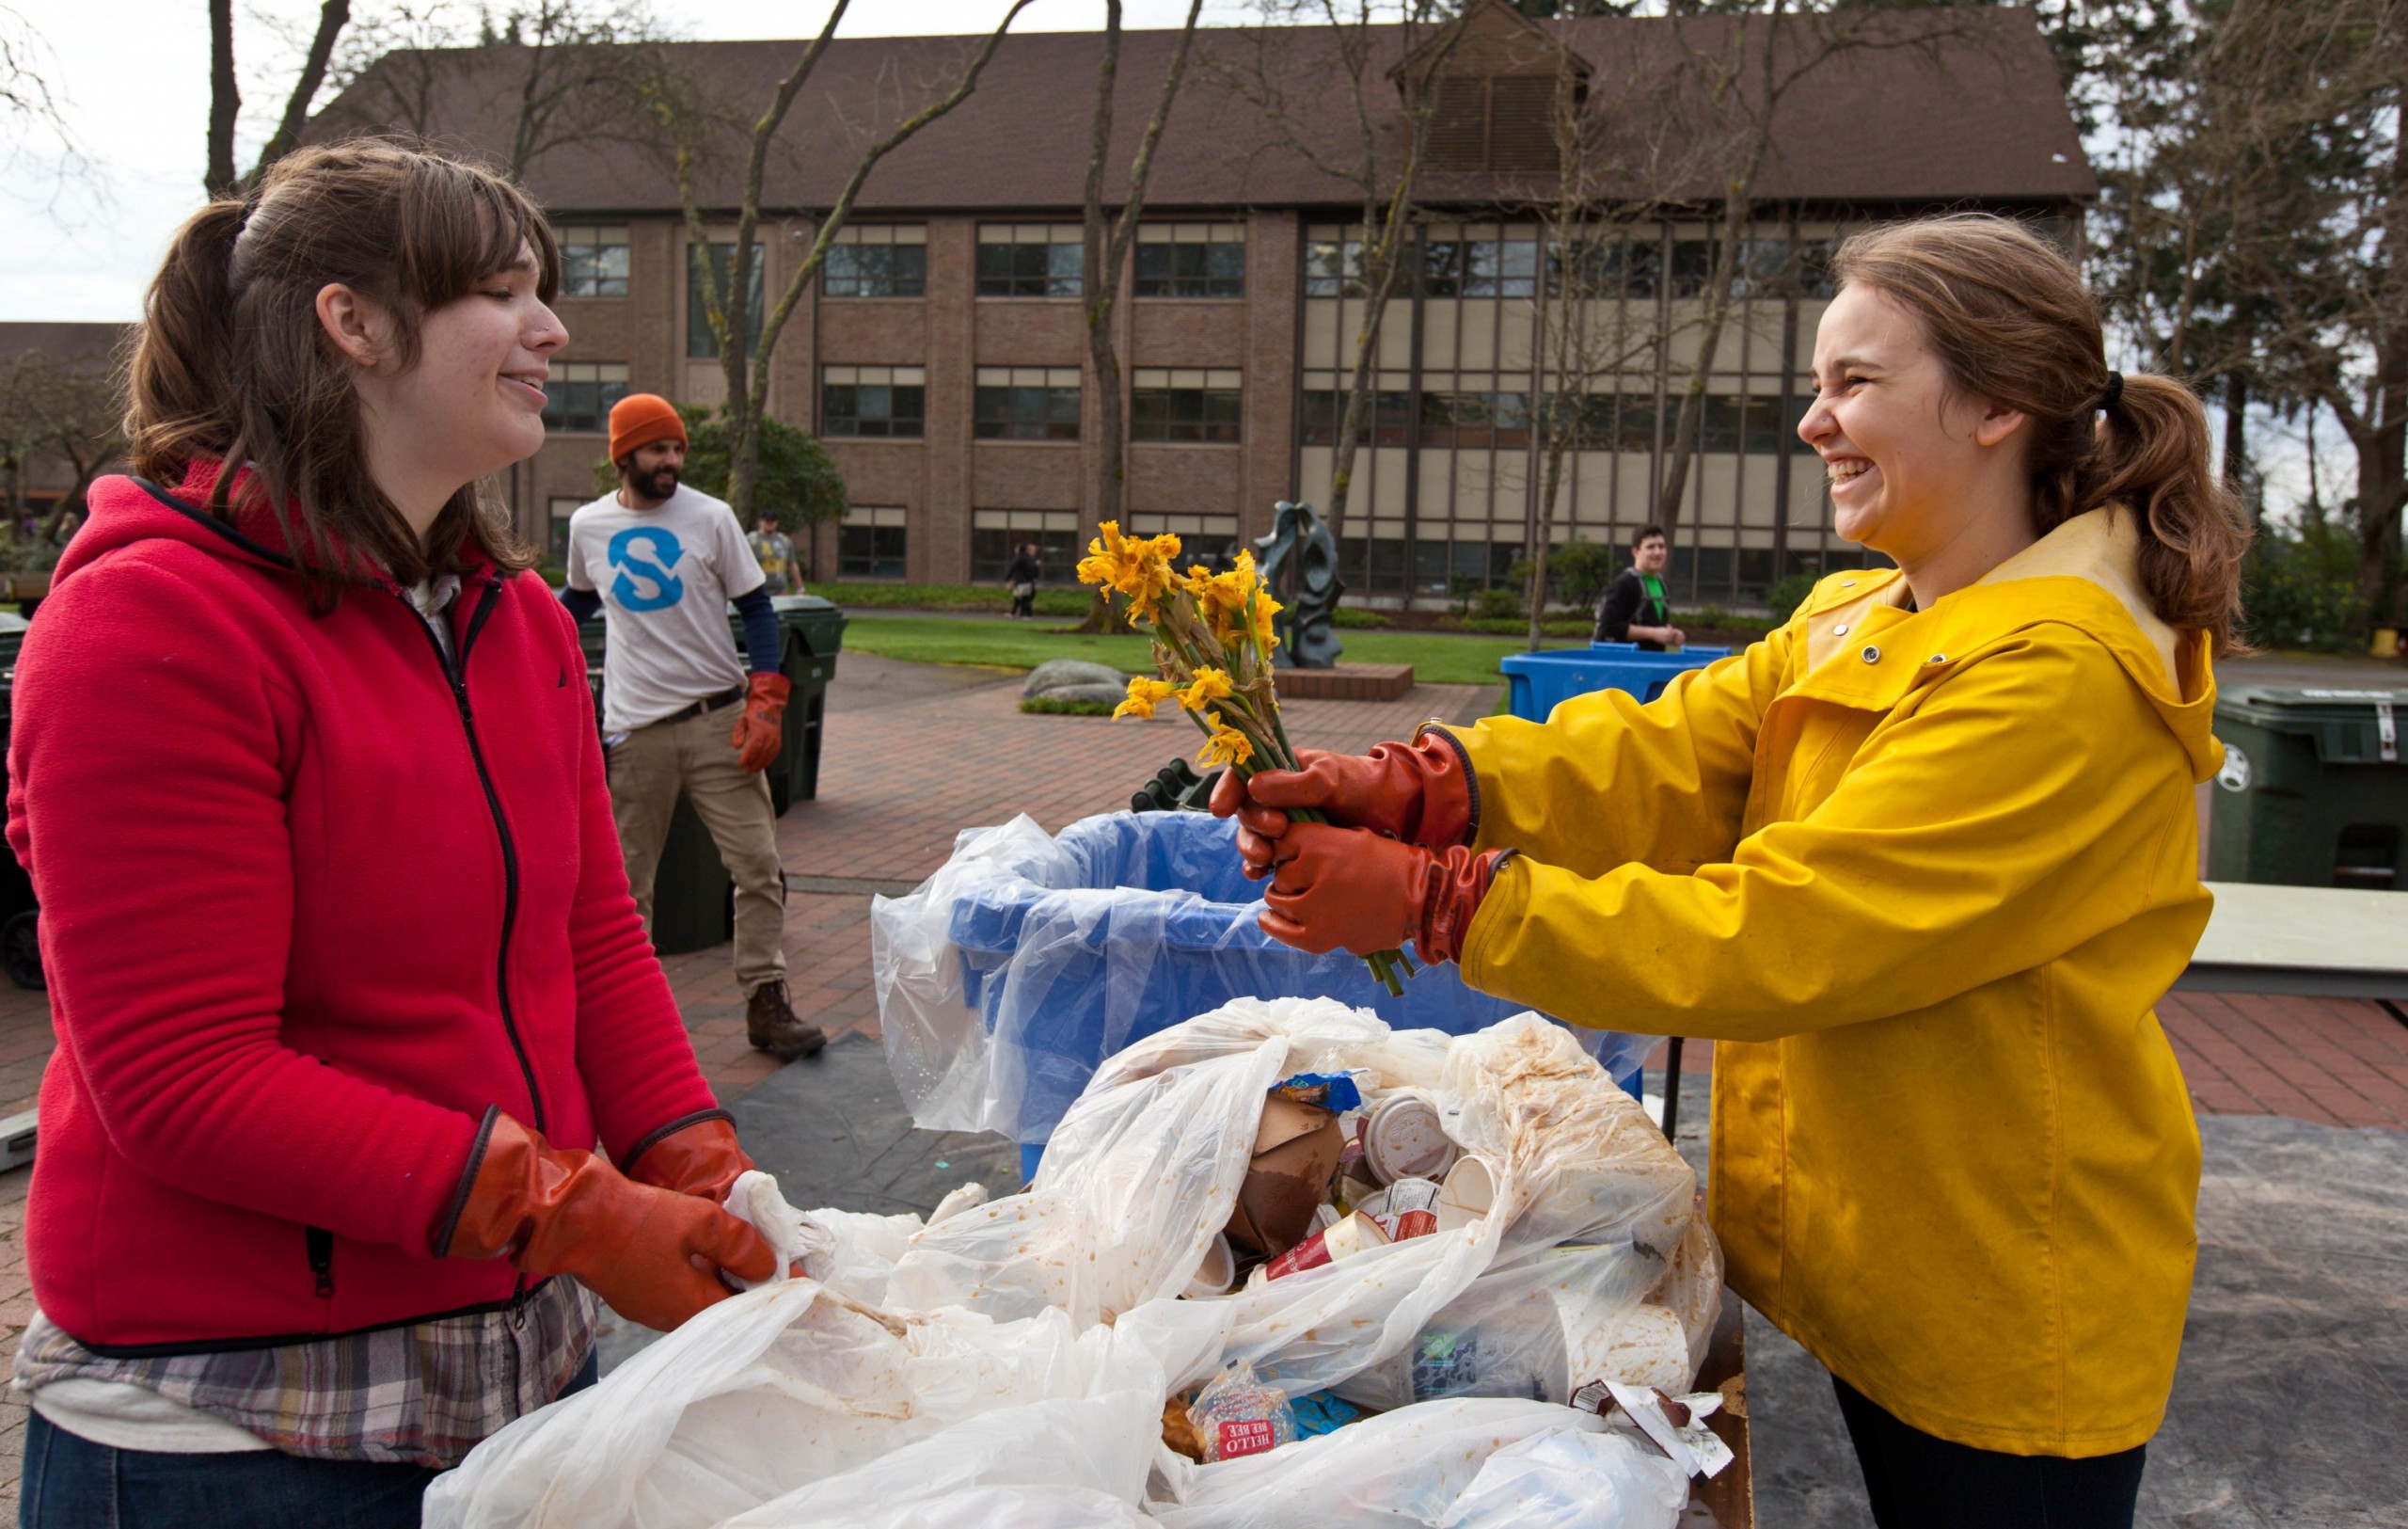 Savannah Phalan '15, right, and Sarah Wheeler 15, work on a table of trash during Garbology on Red Square, where grash from different locations is sorted to determine how much is recycleable or compostable at PLU on Tuesday, March 17, 2015. (Photo: John Froschauer/PLU)